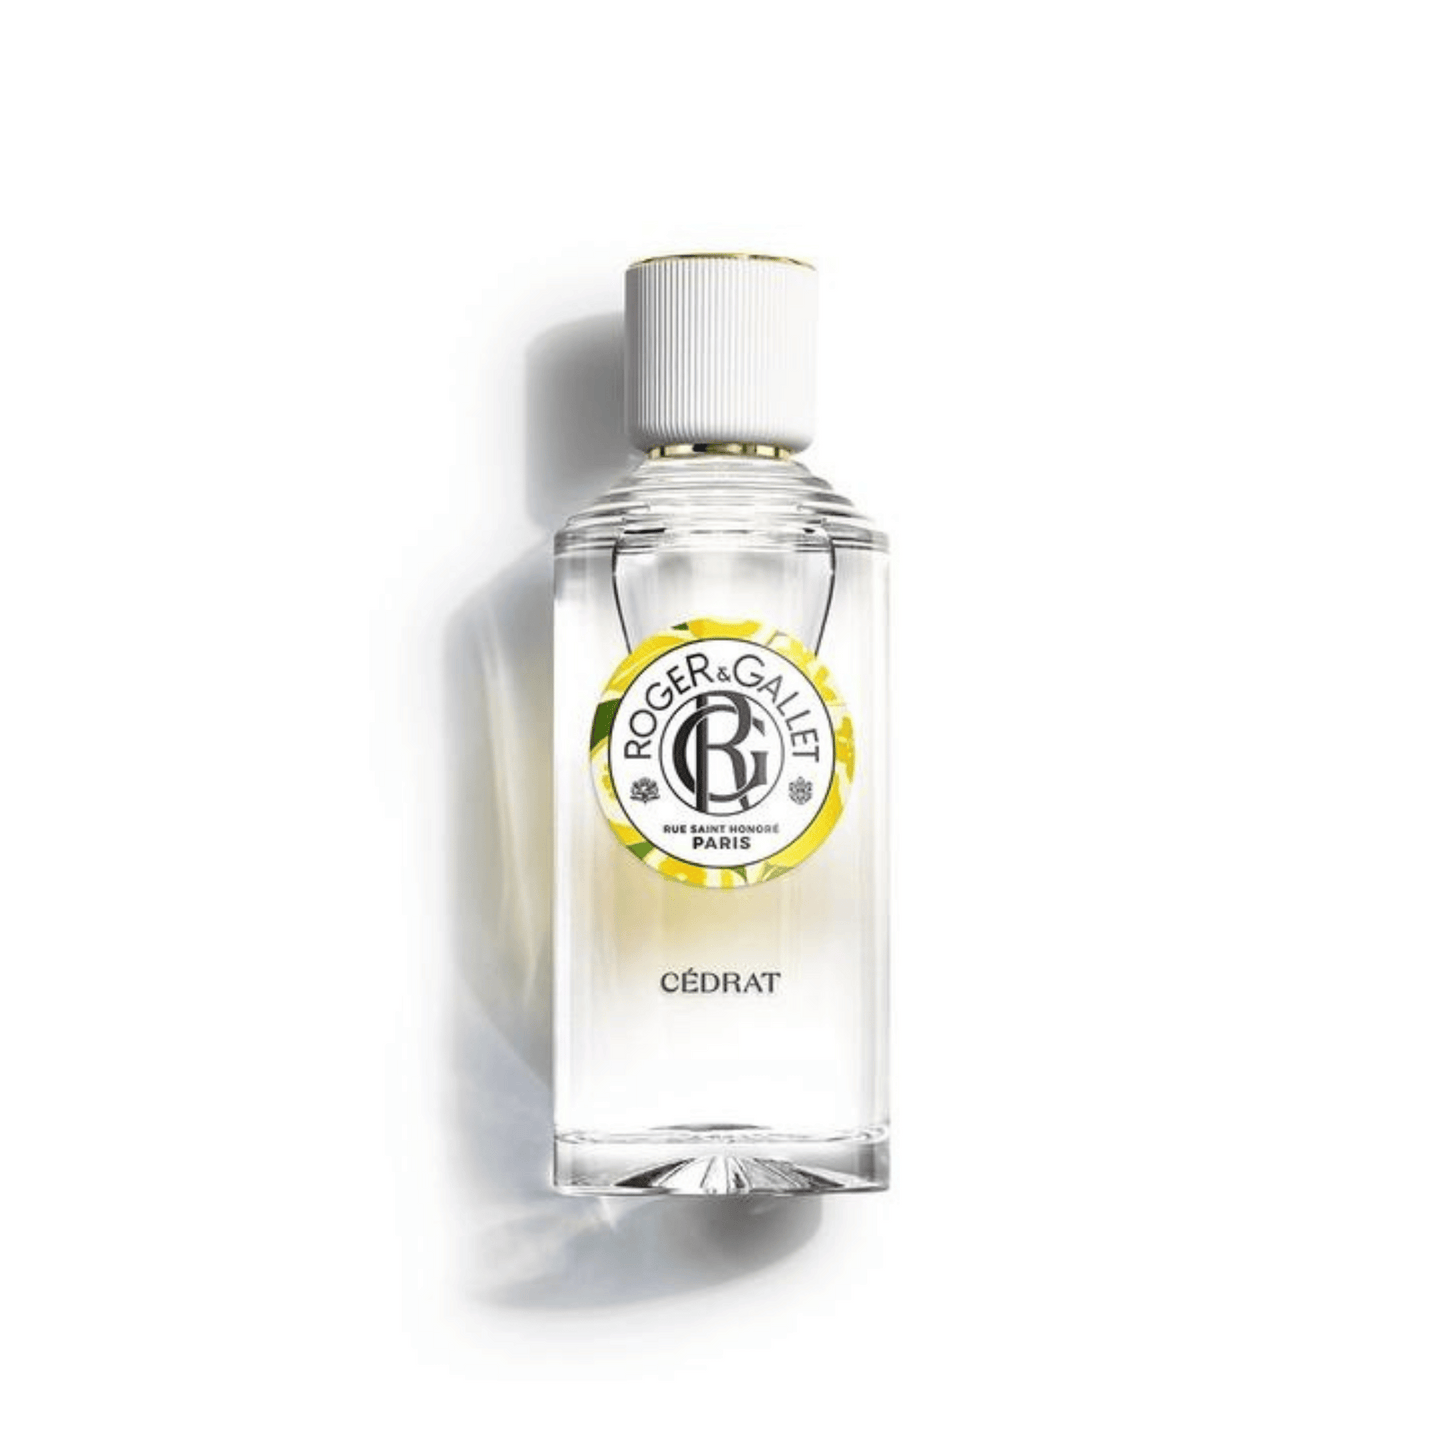 Primary Image of Cedrat (Citrus) Wellbeing Water Fragrance Spray